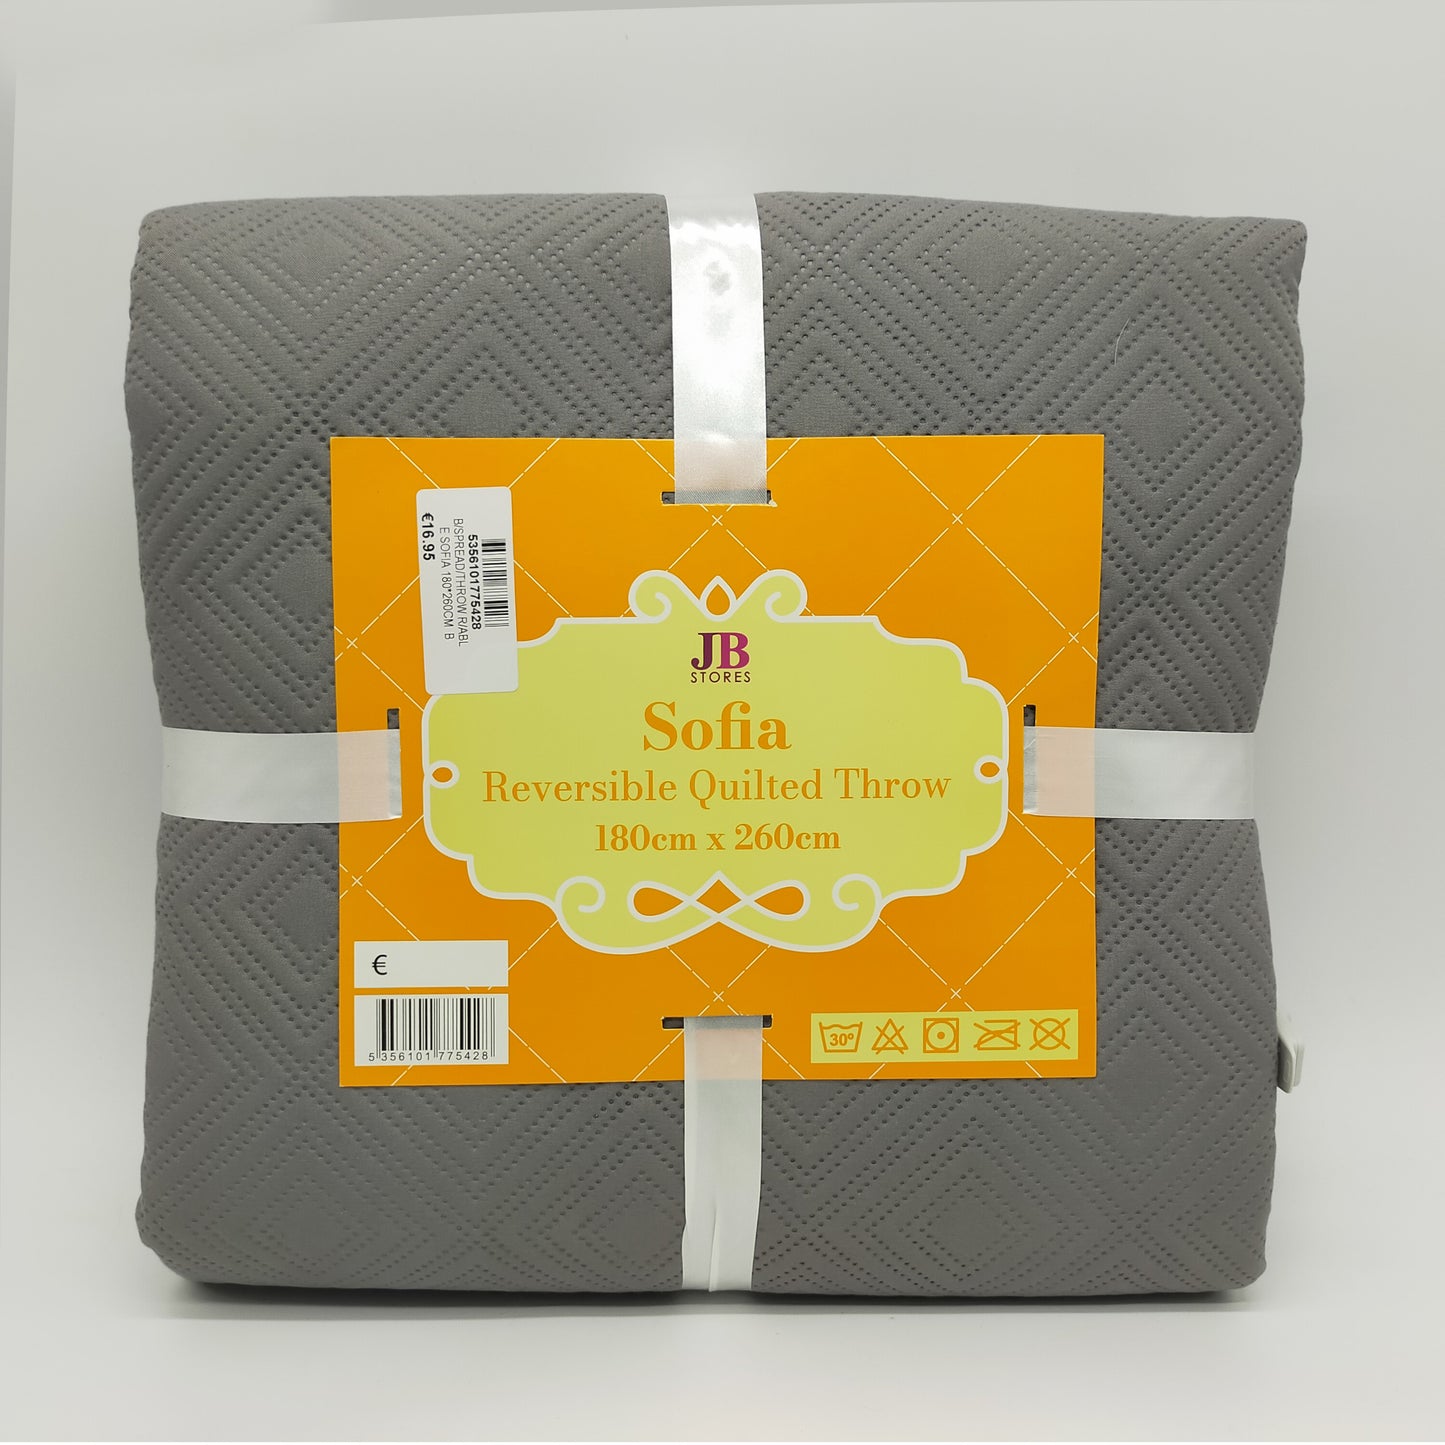 Sofia Reversible Quilted Throw Overs